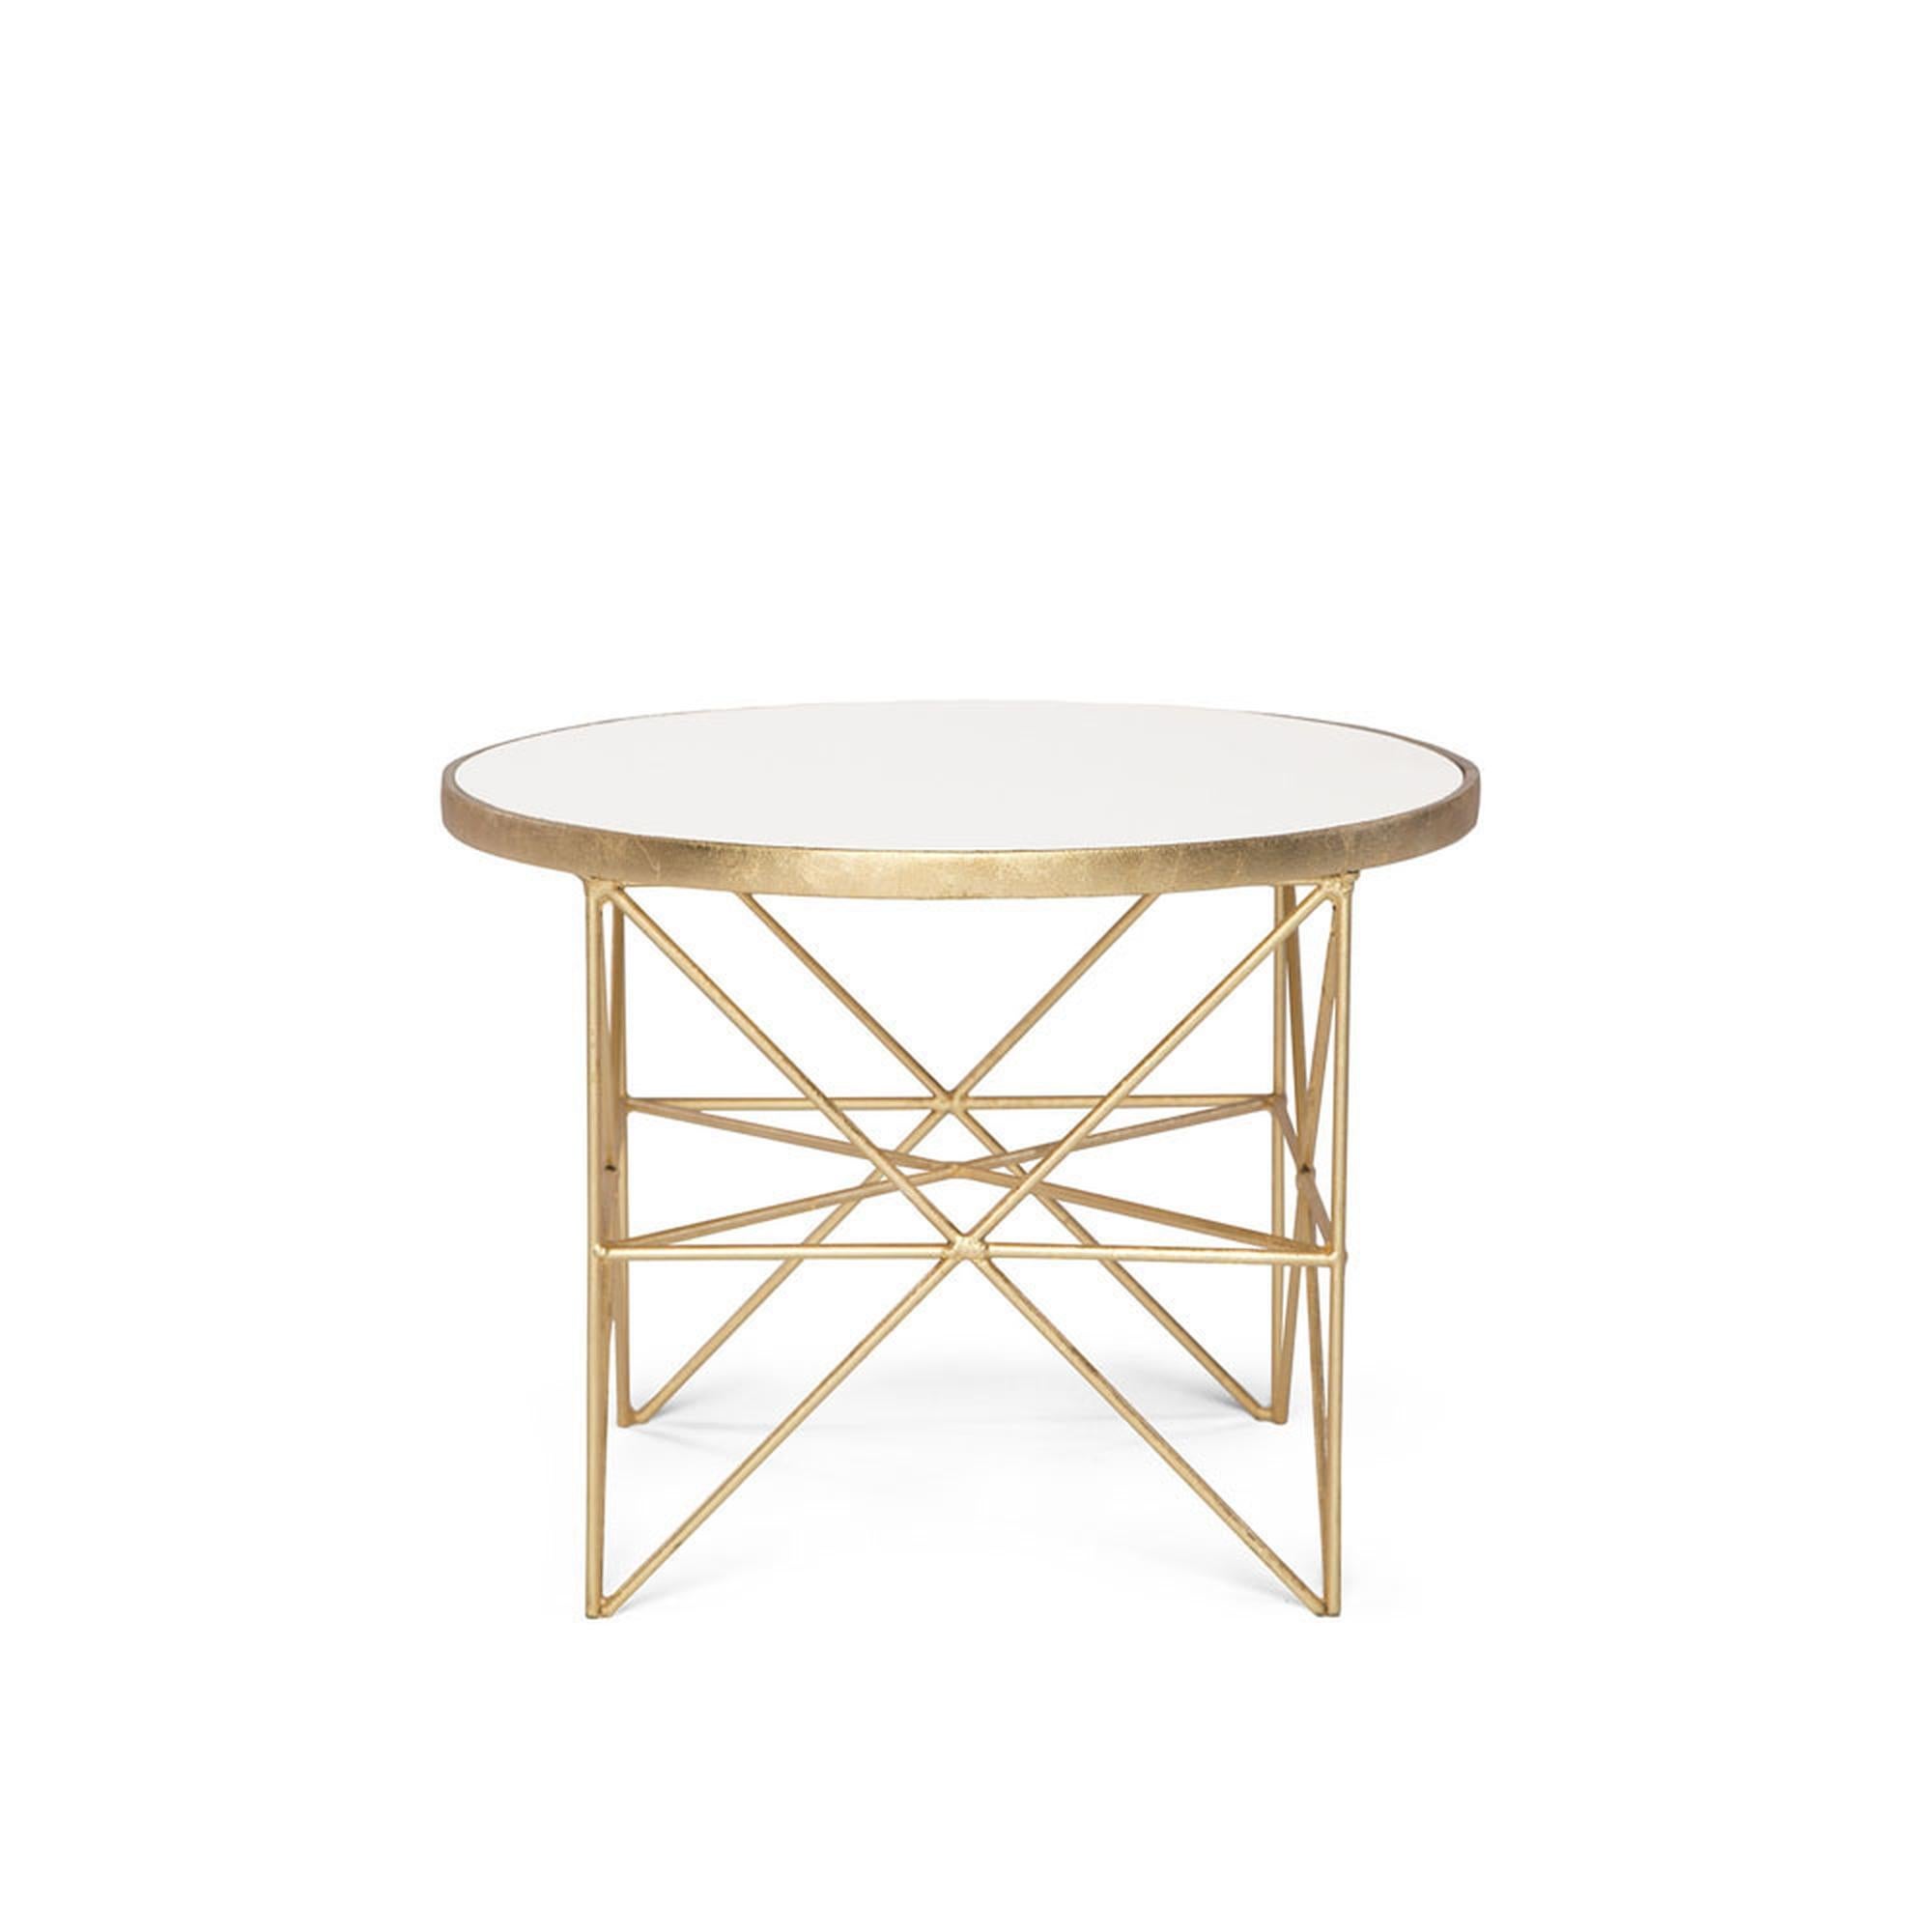 This handmade Monterey short side table features an intricate hand-gilded metal base and a hand-finished wood top. Elegant and functional, this side table unifies style and aesthetic by adding a touch of Old Hollywood glitz on a hand-gilded